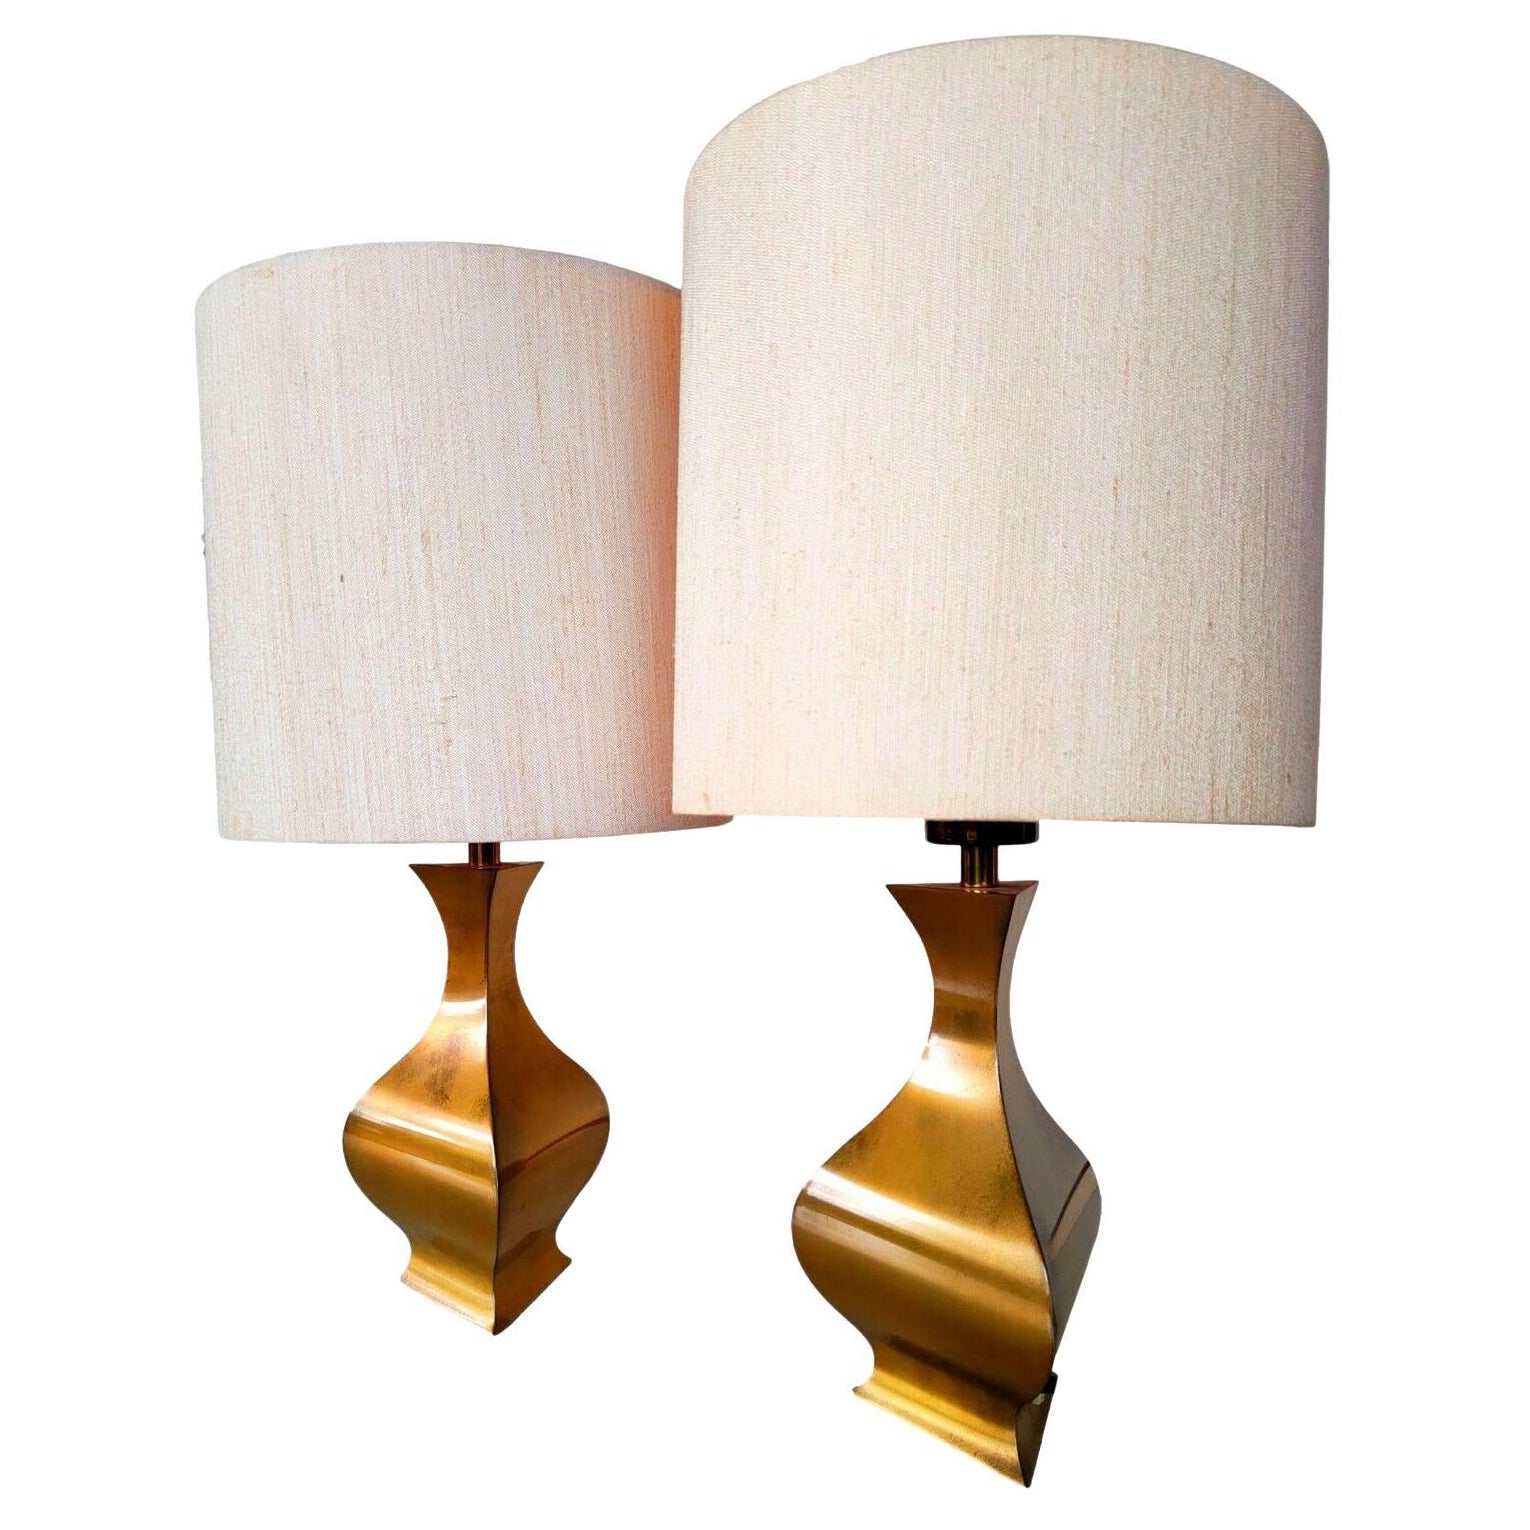 Pair of table lamps design A. Montagna Grillo A. Tonello for High Society, 1970s